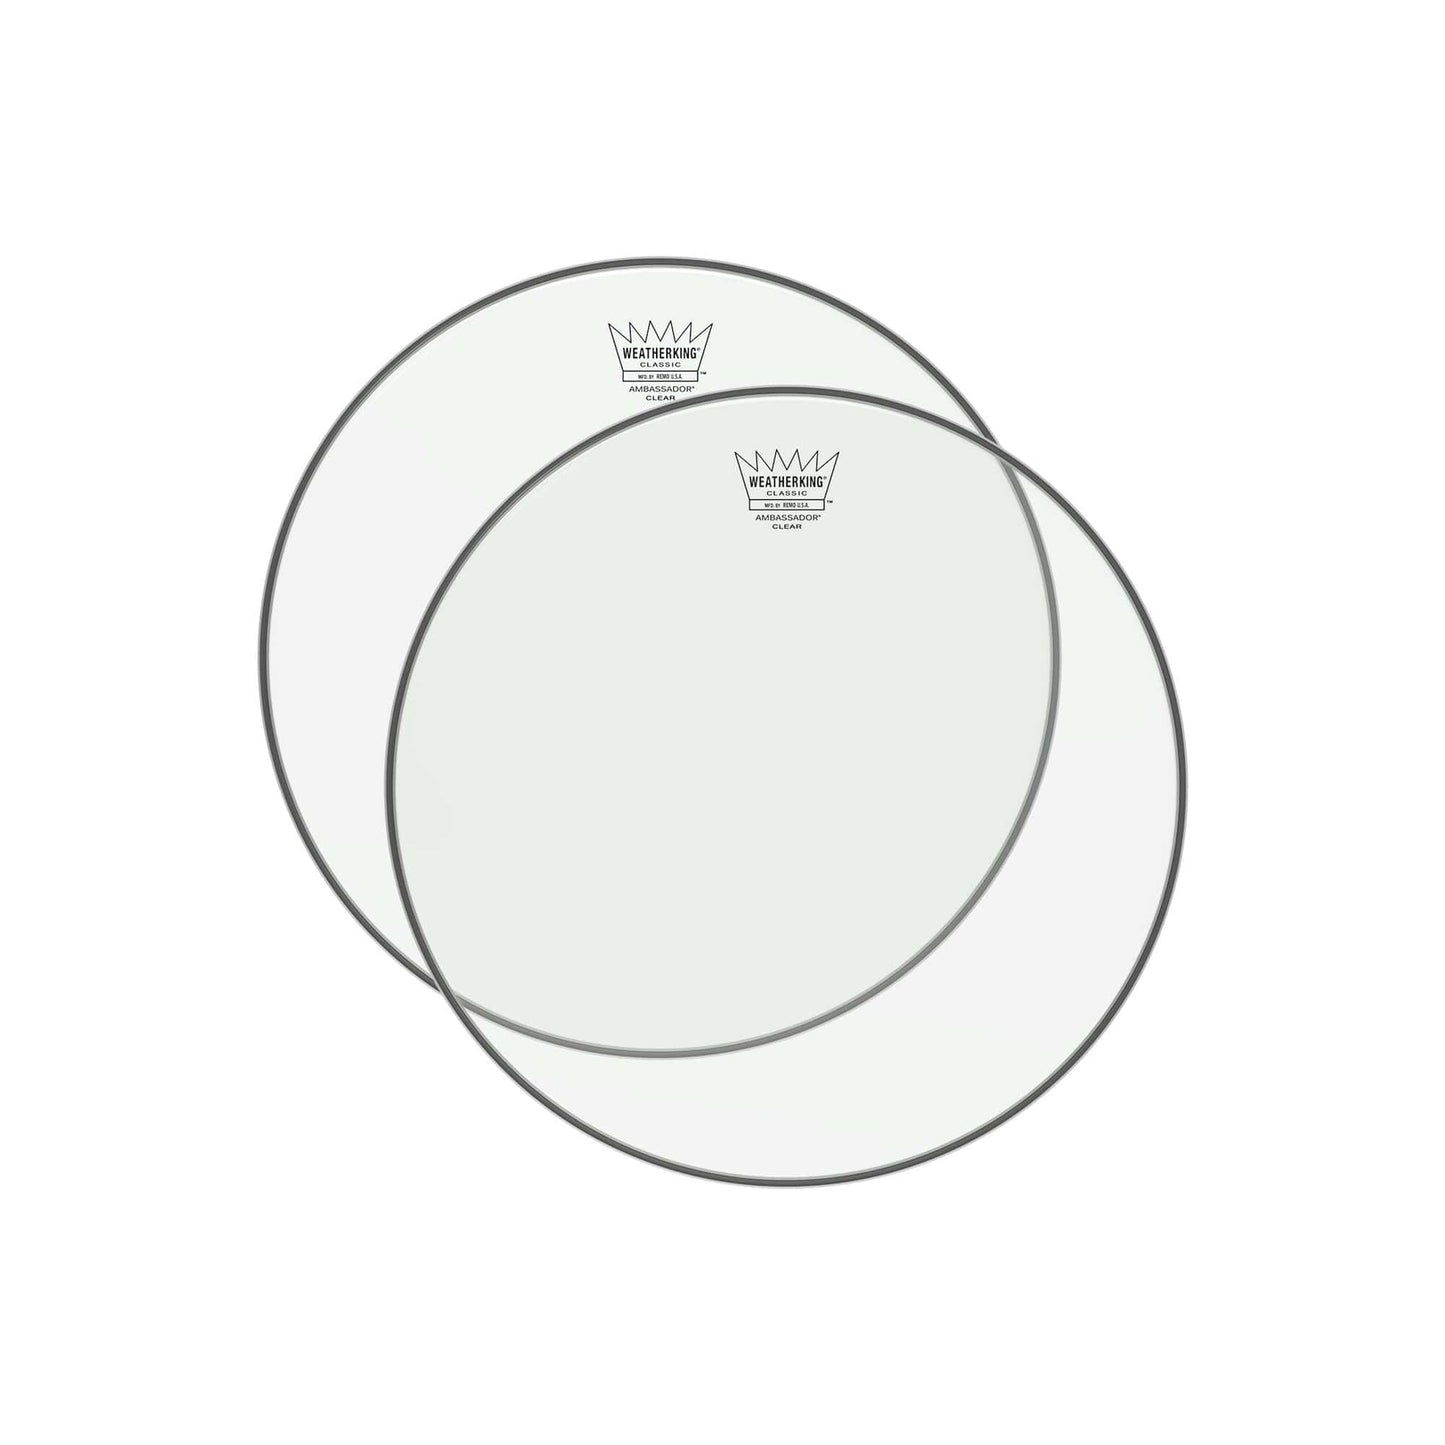 Remo 13" Ambassador Classic Clear Drumhead (2 Pack Bundle) Drums and Percussion / Parts and Accessories / Heads